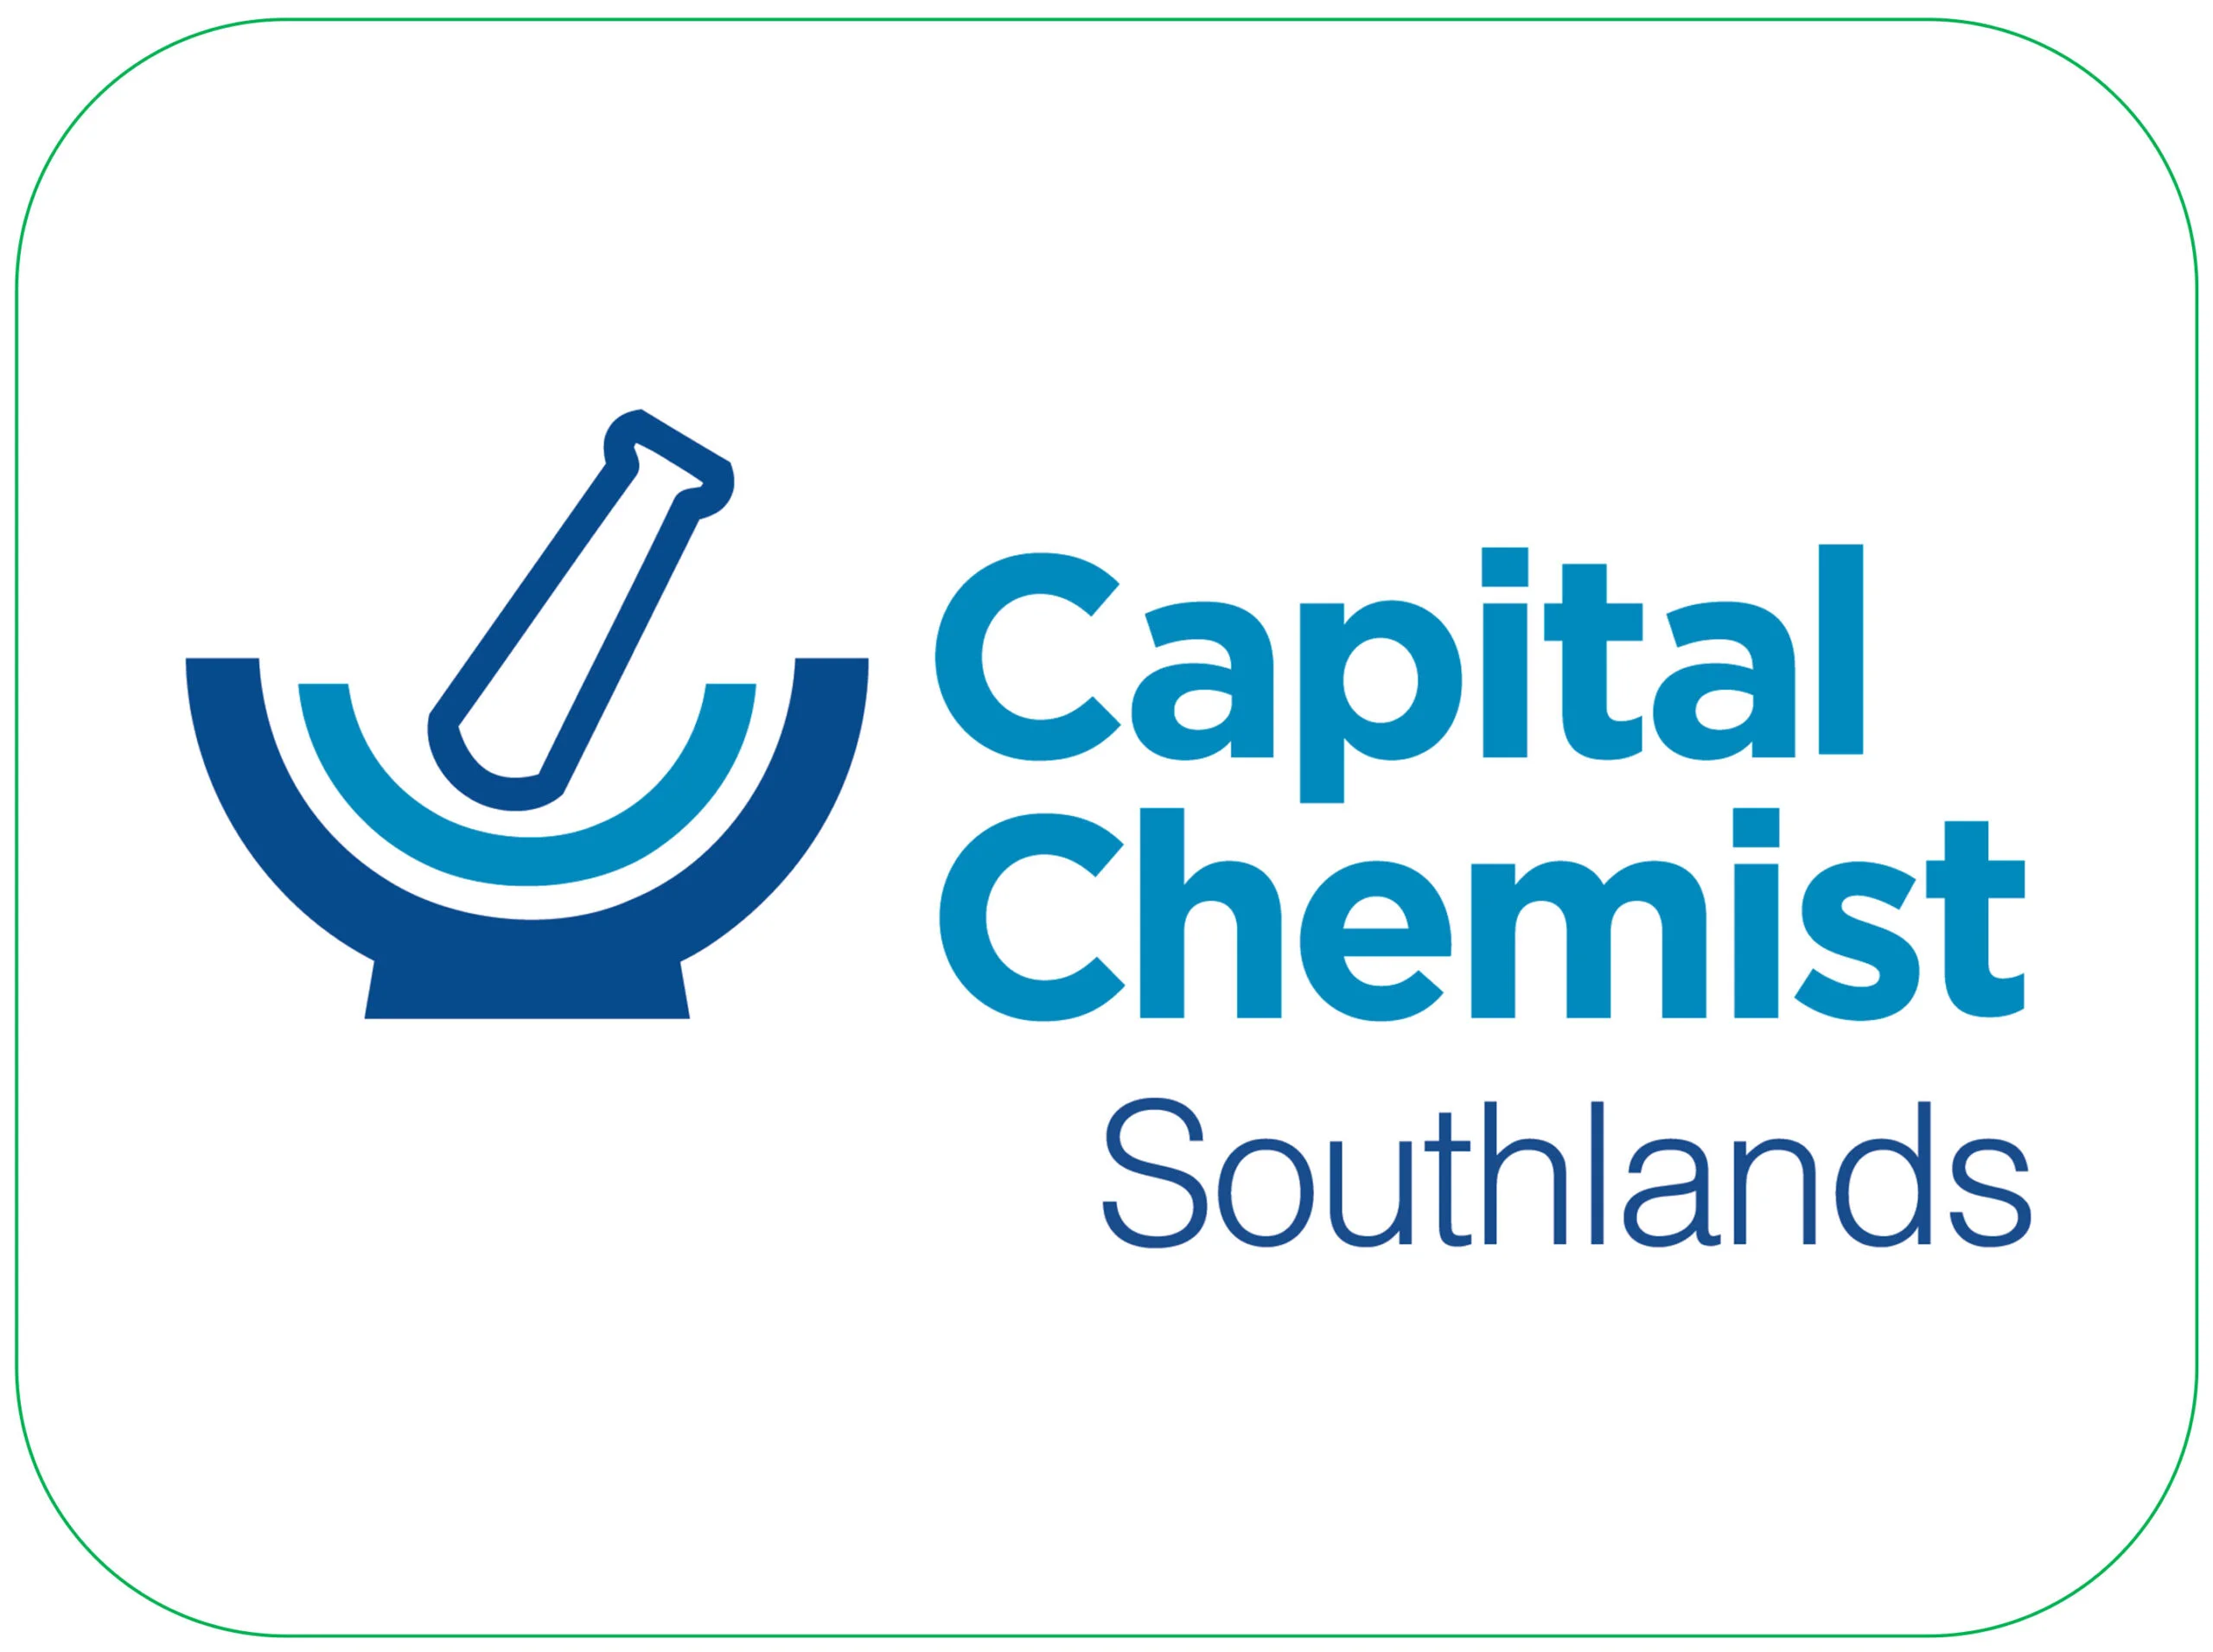 Recognised Workplaces - Capital Chemist Southlands